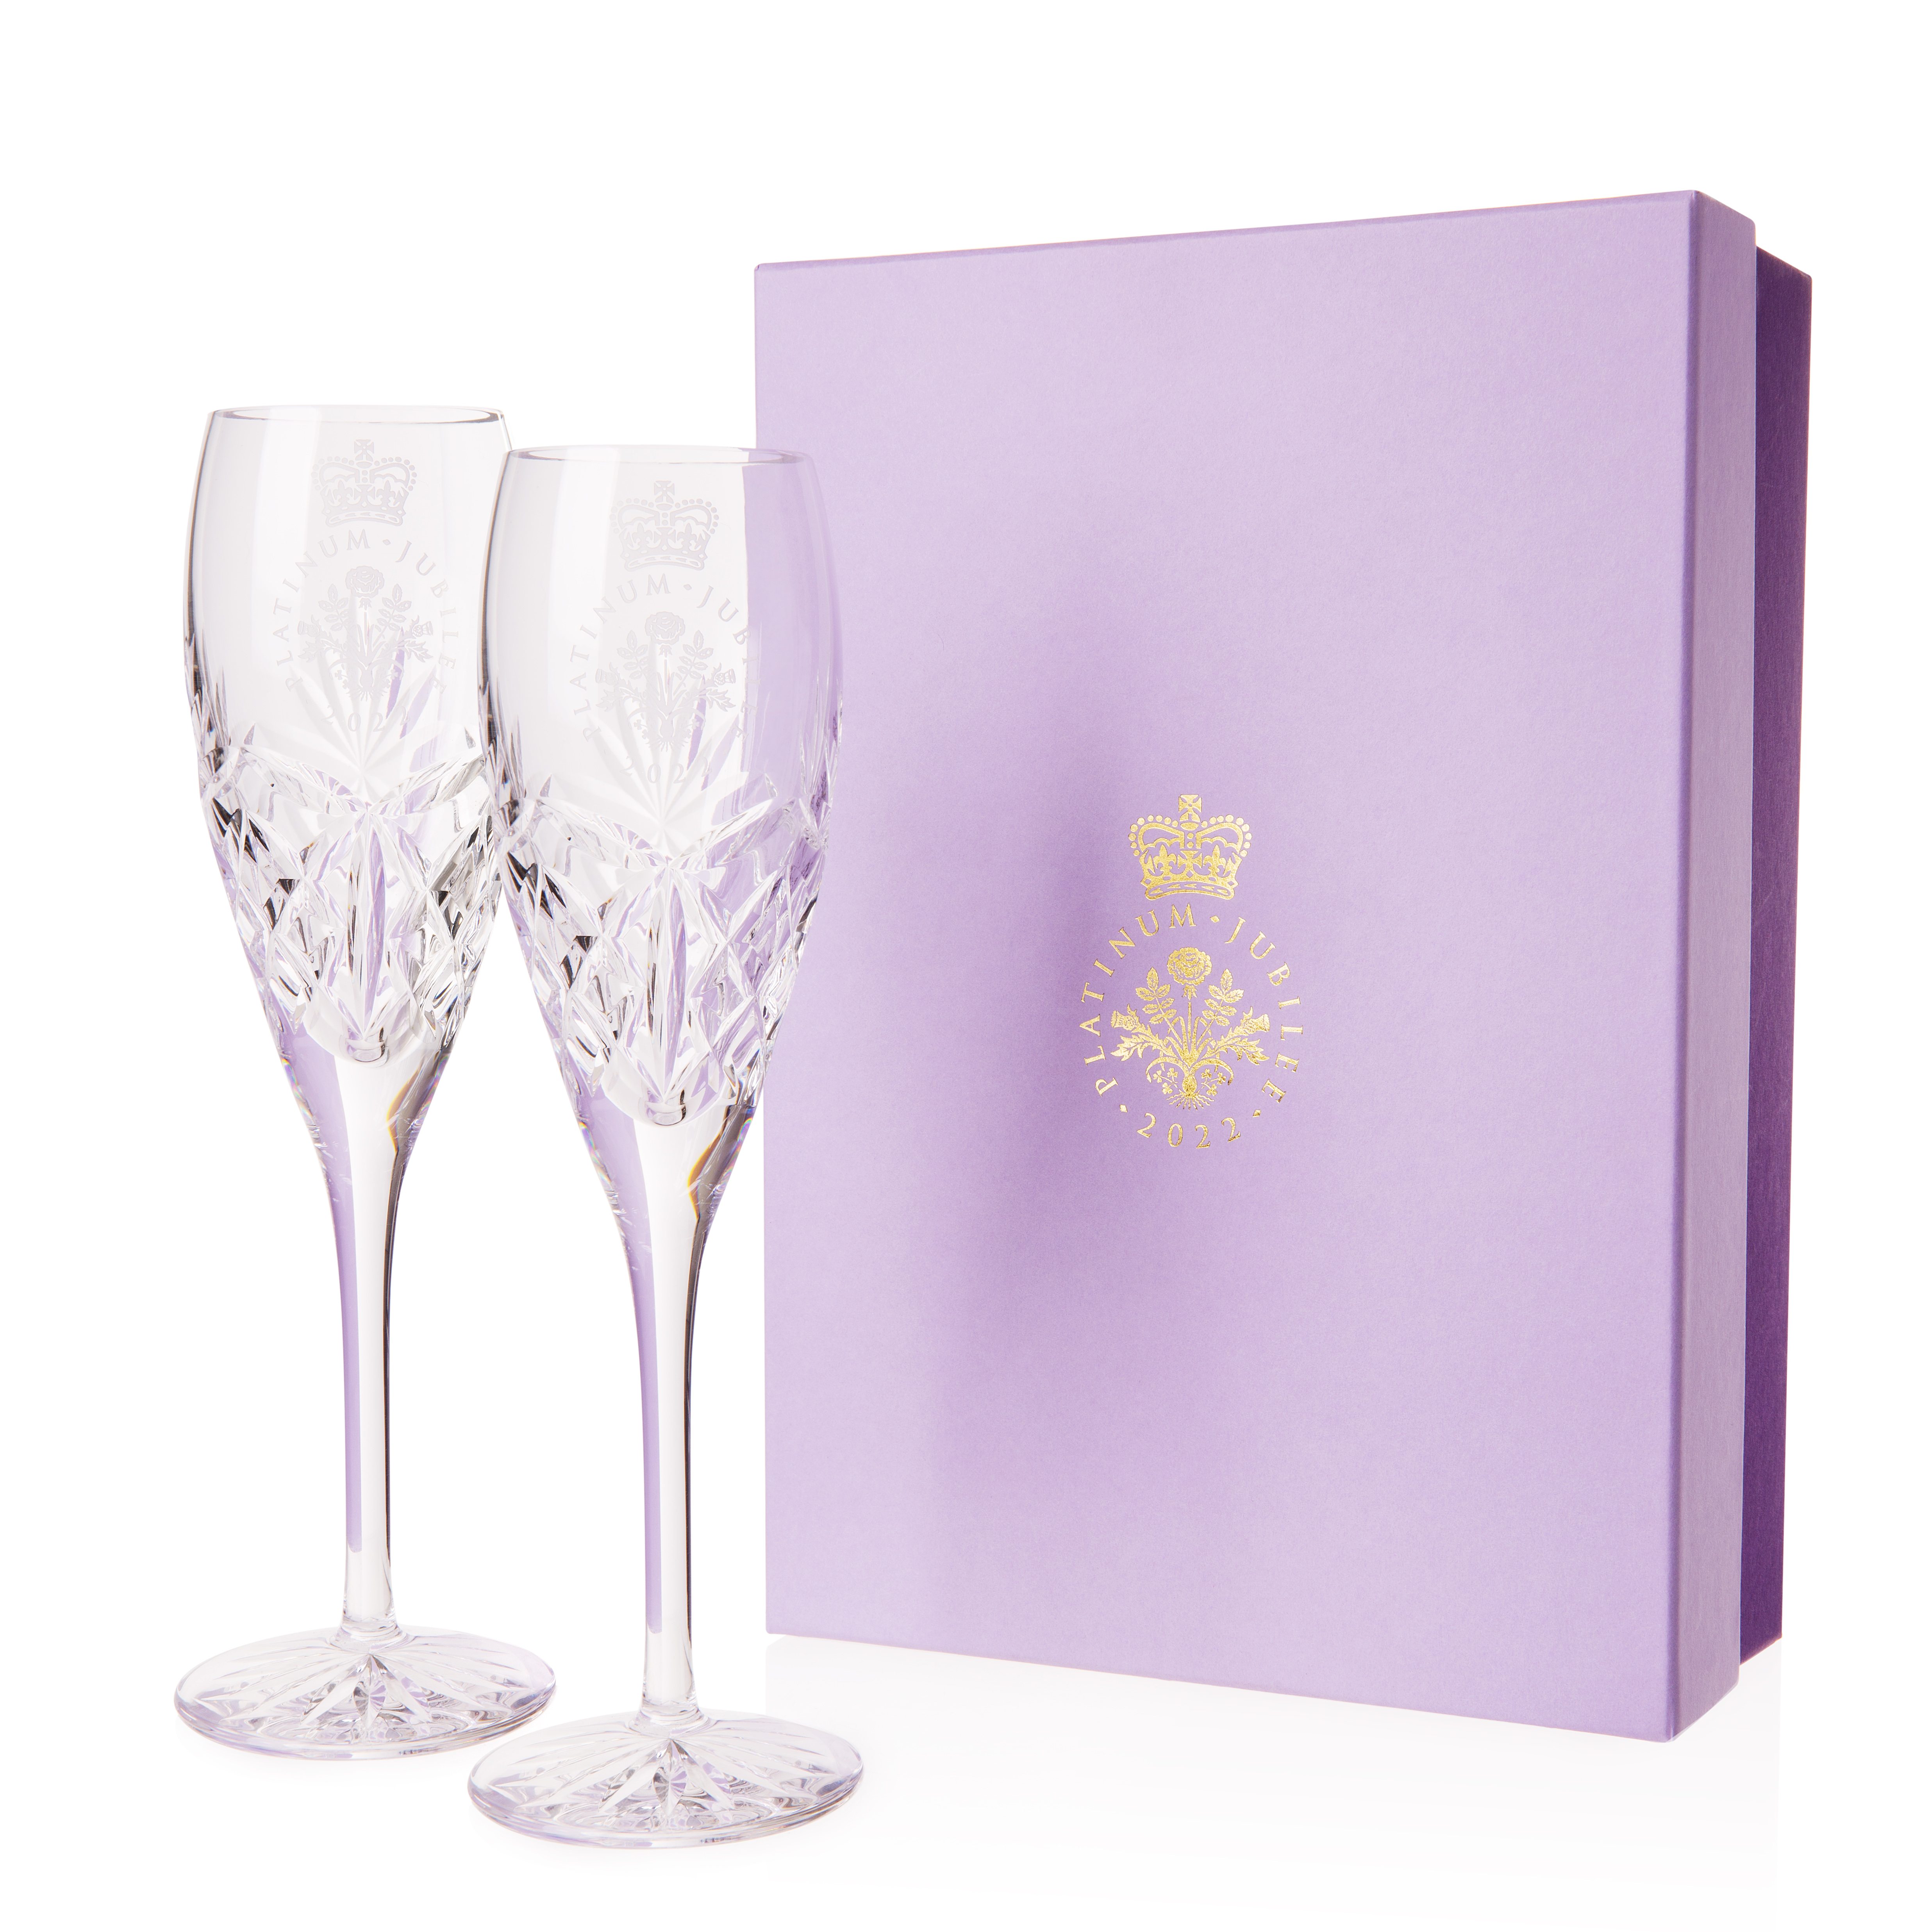 The £120 Platinum Jubilee champagne flutes